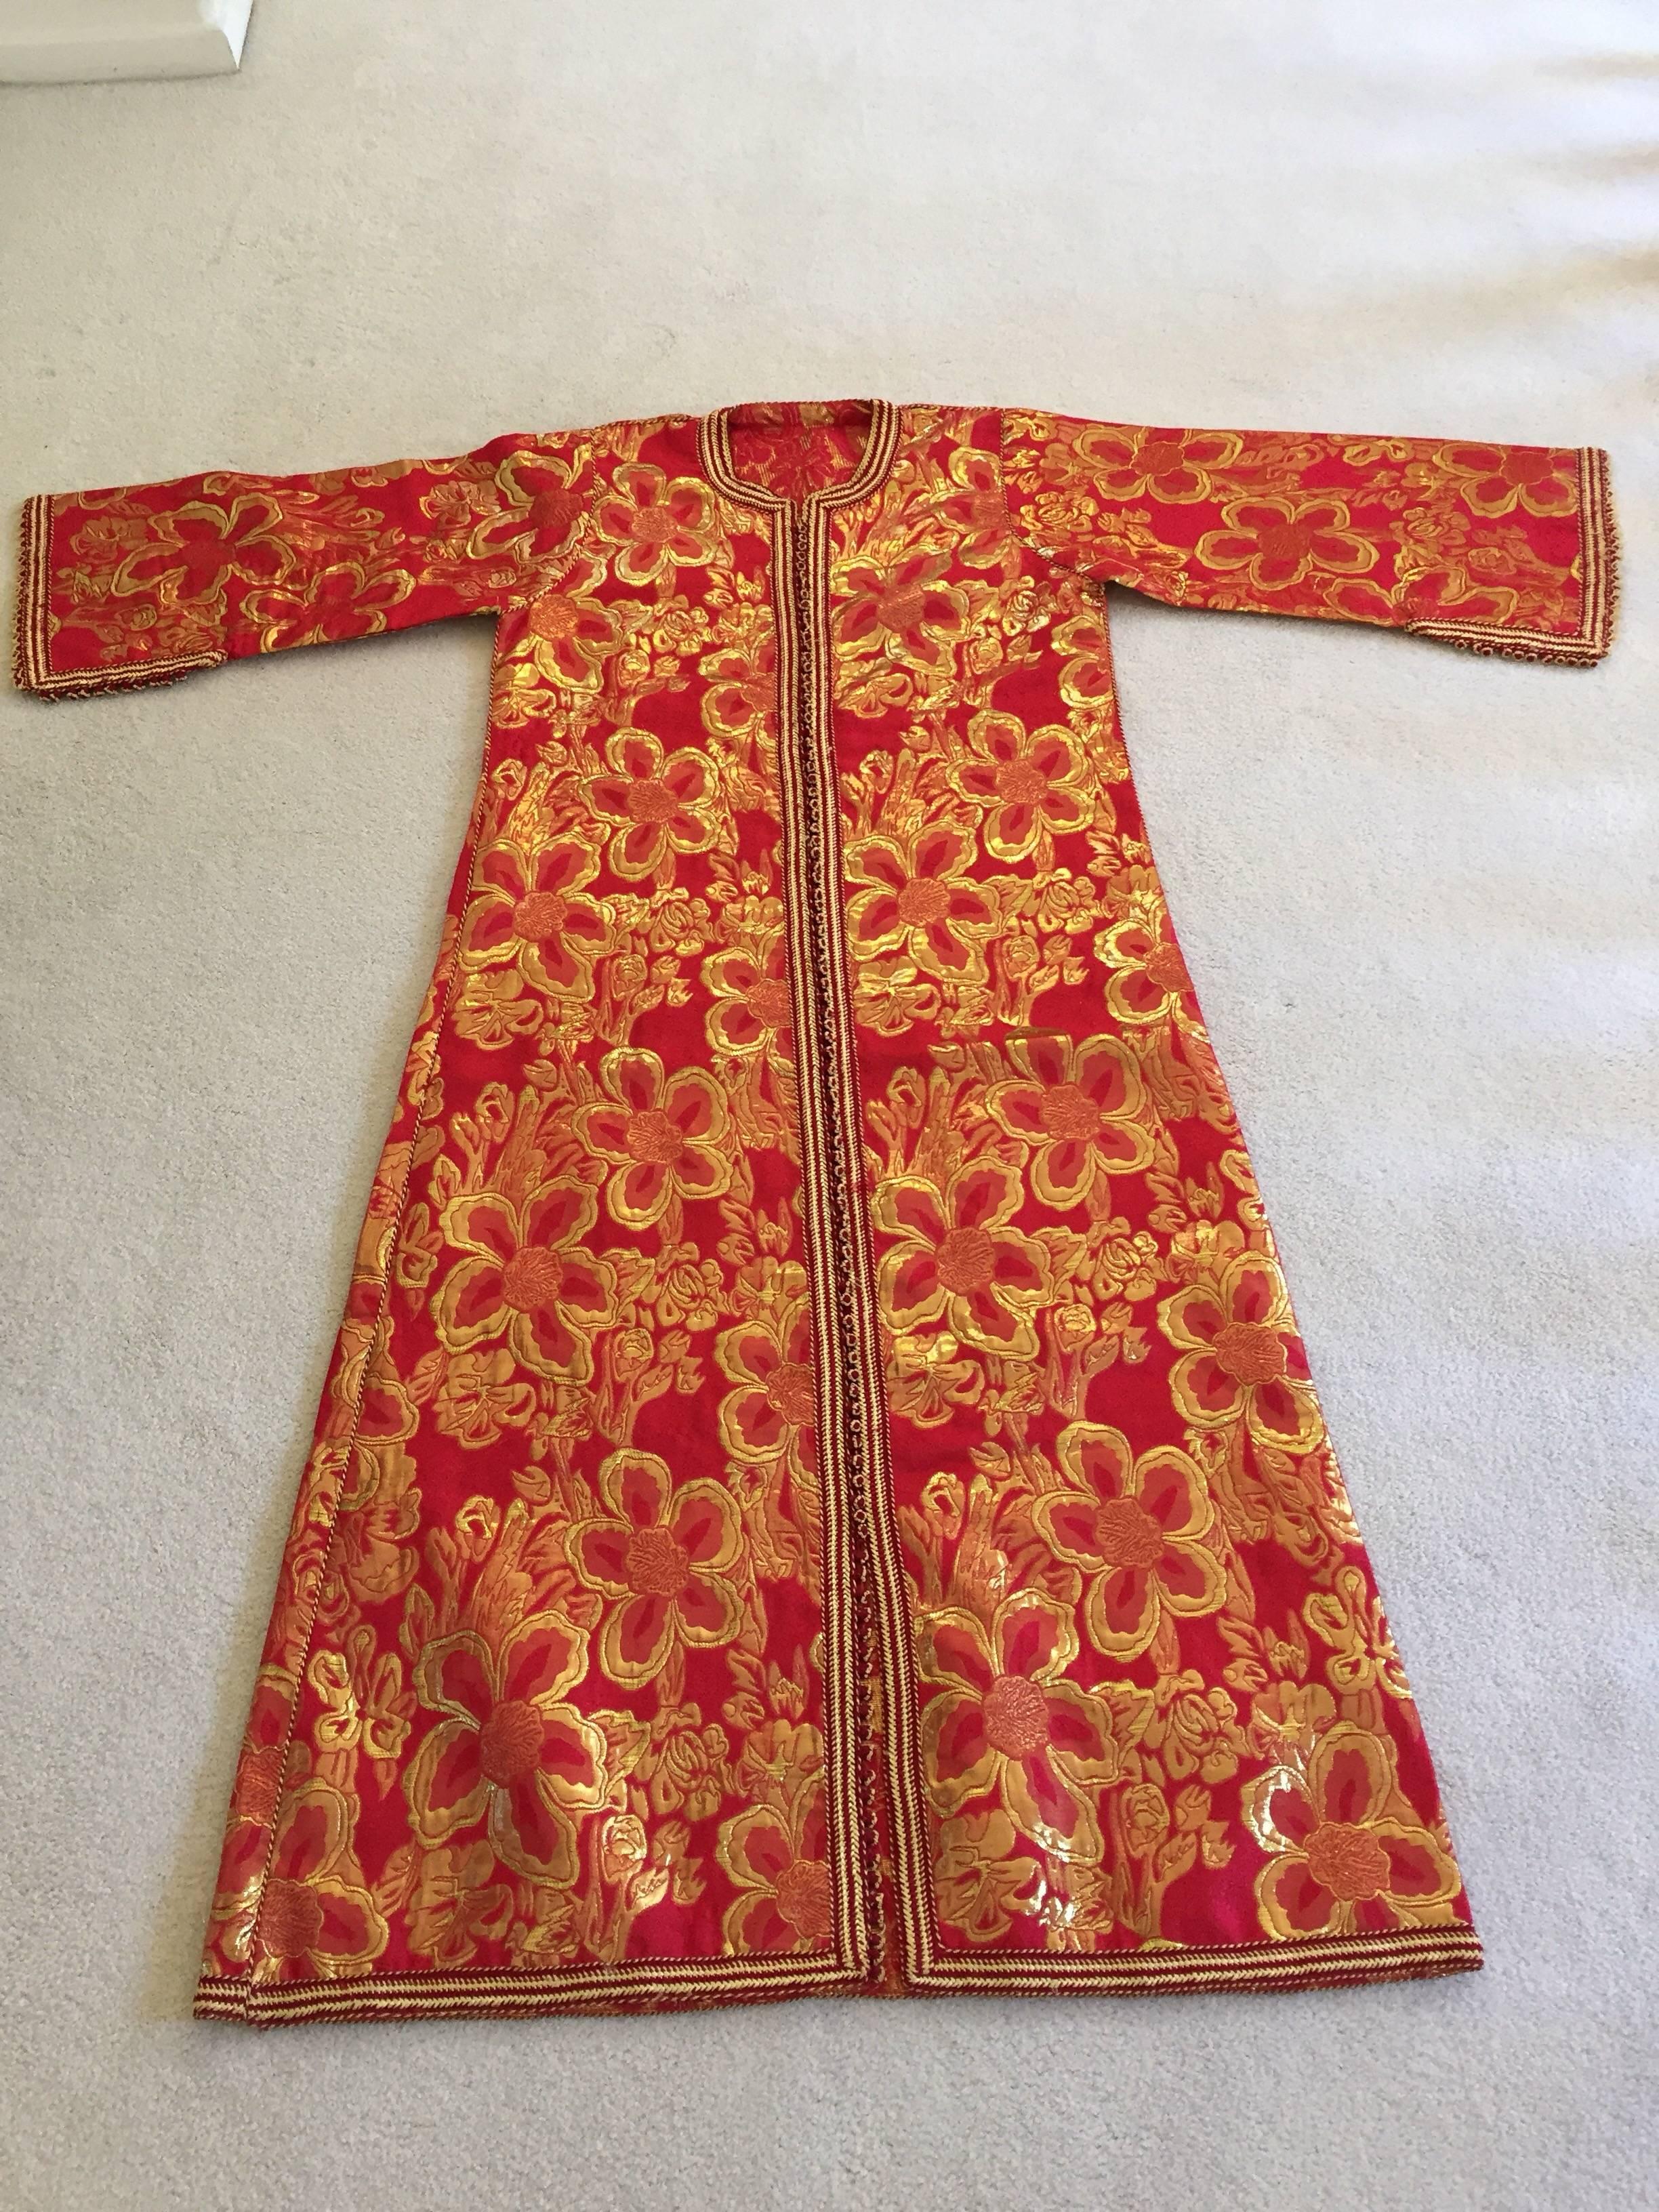 Vintage Moroccan Kaftan 1970s Red and Gold Floral Brocade Caftan Maxi Dress In Good Condition For Sale In North Hollywood, CA